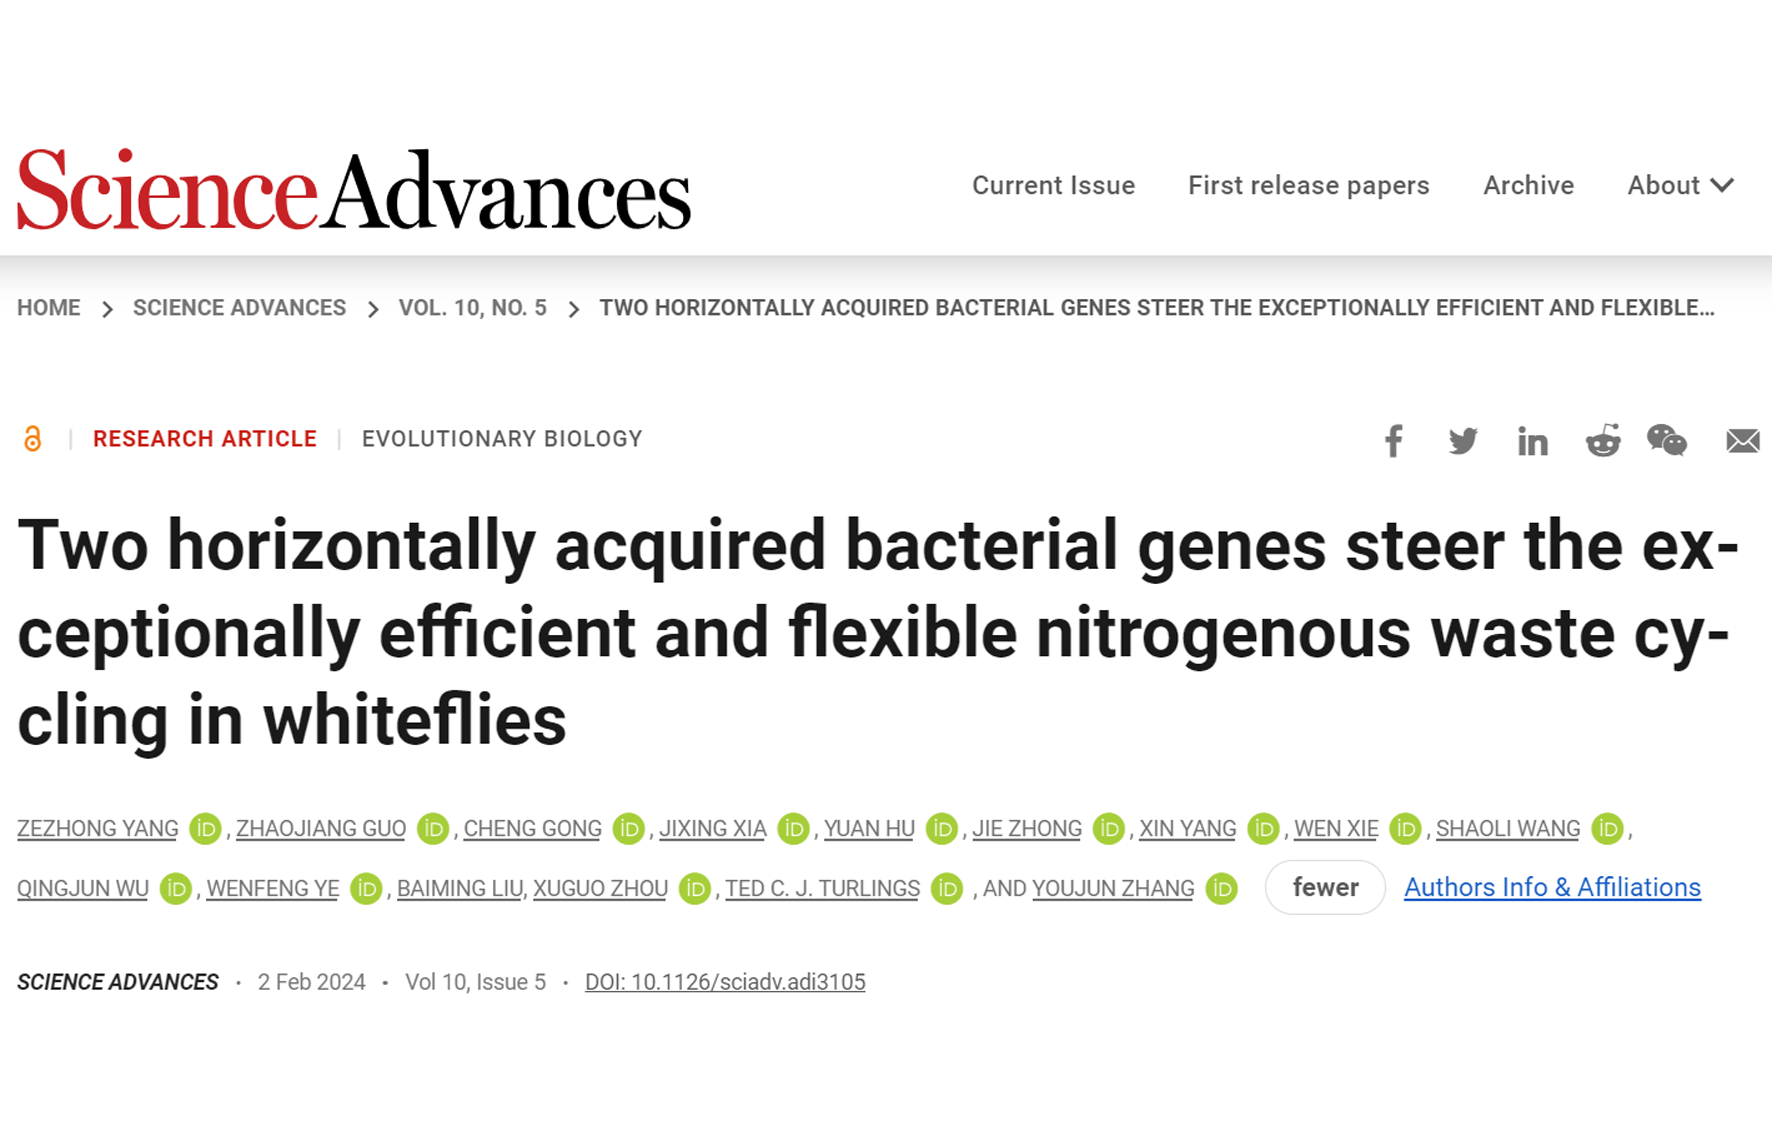 Two horizontally acquired bacterial genes steer the exceptionally efficient and flexible nitrogenous waste cycling in whiteflies